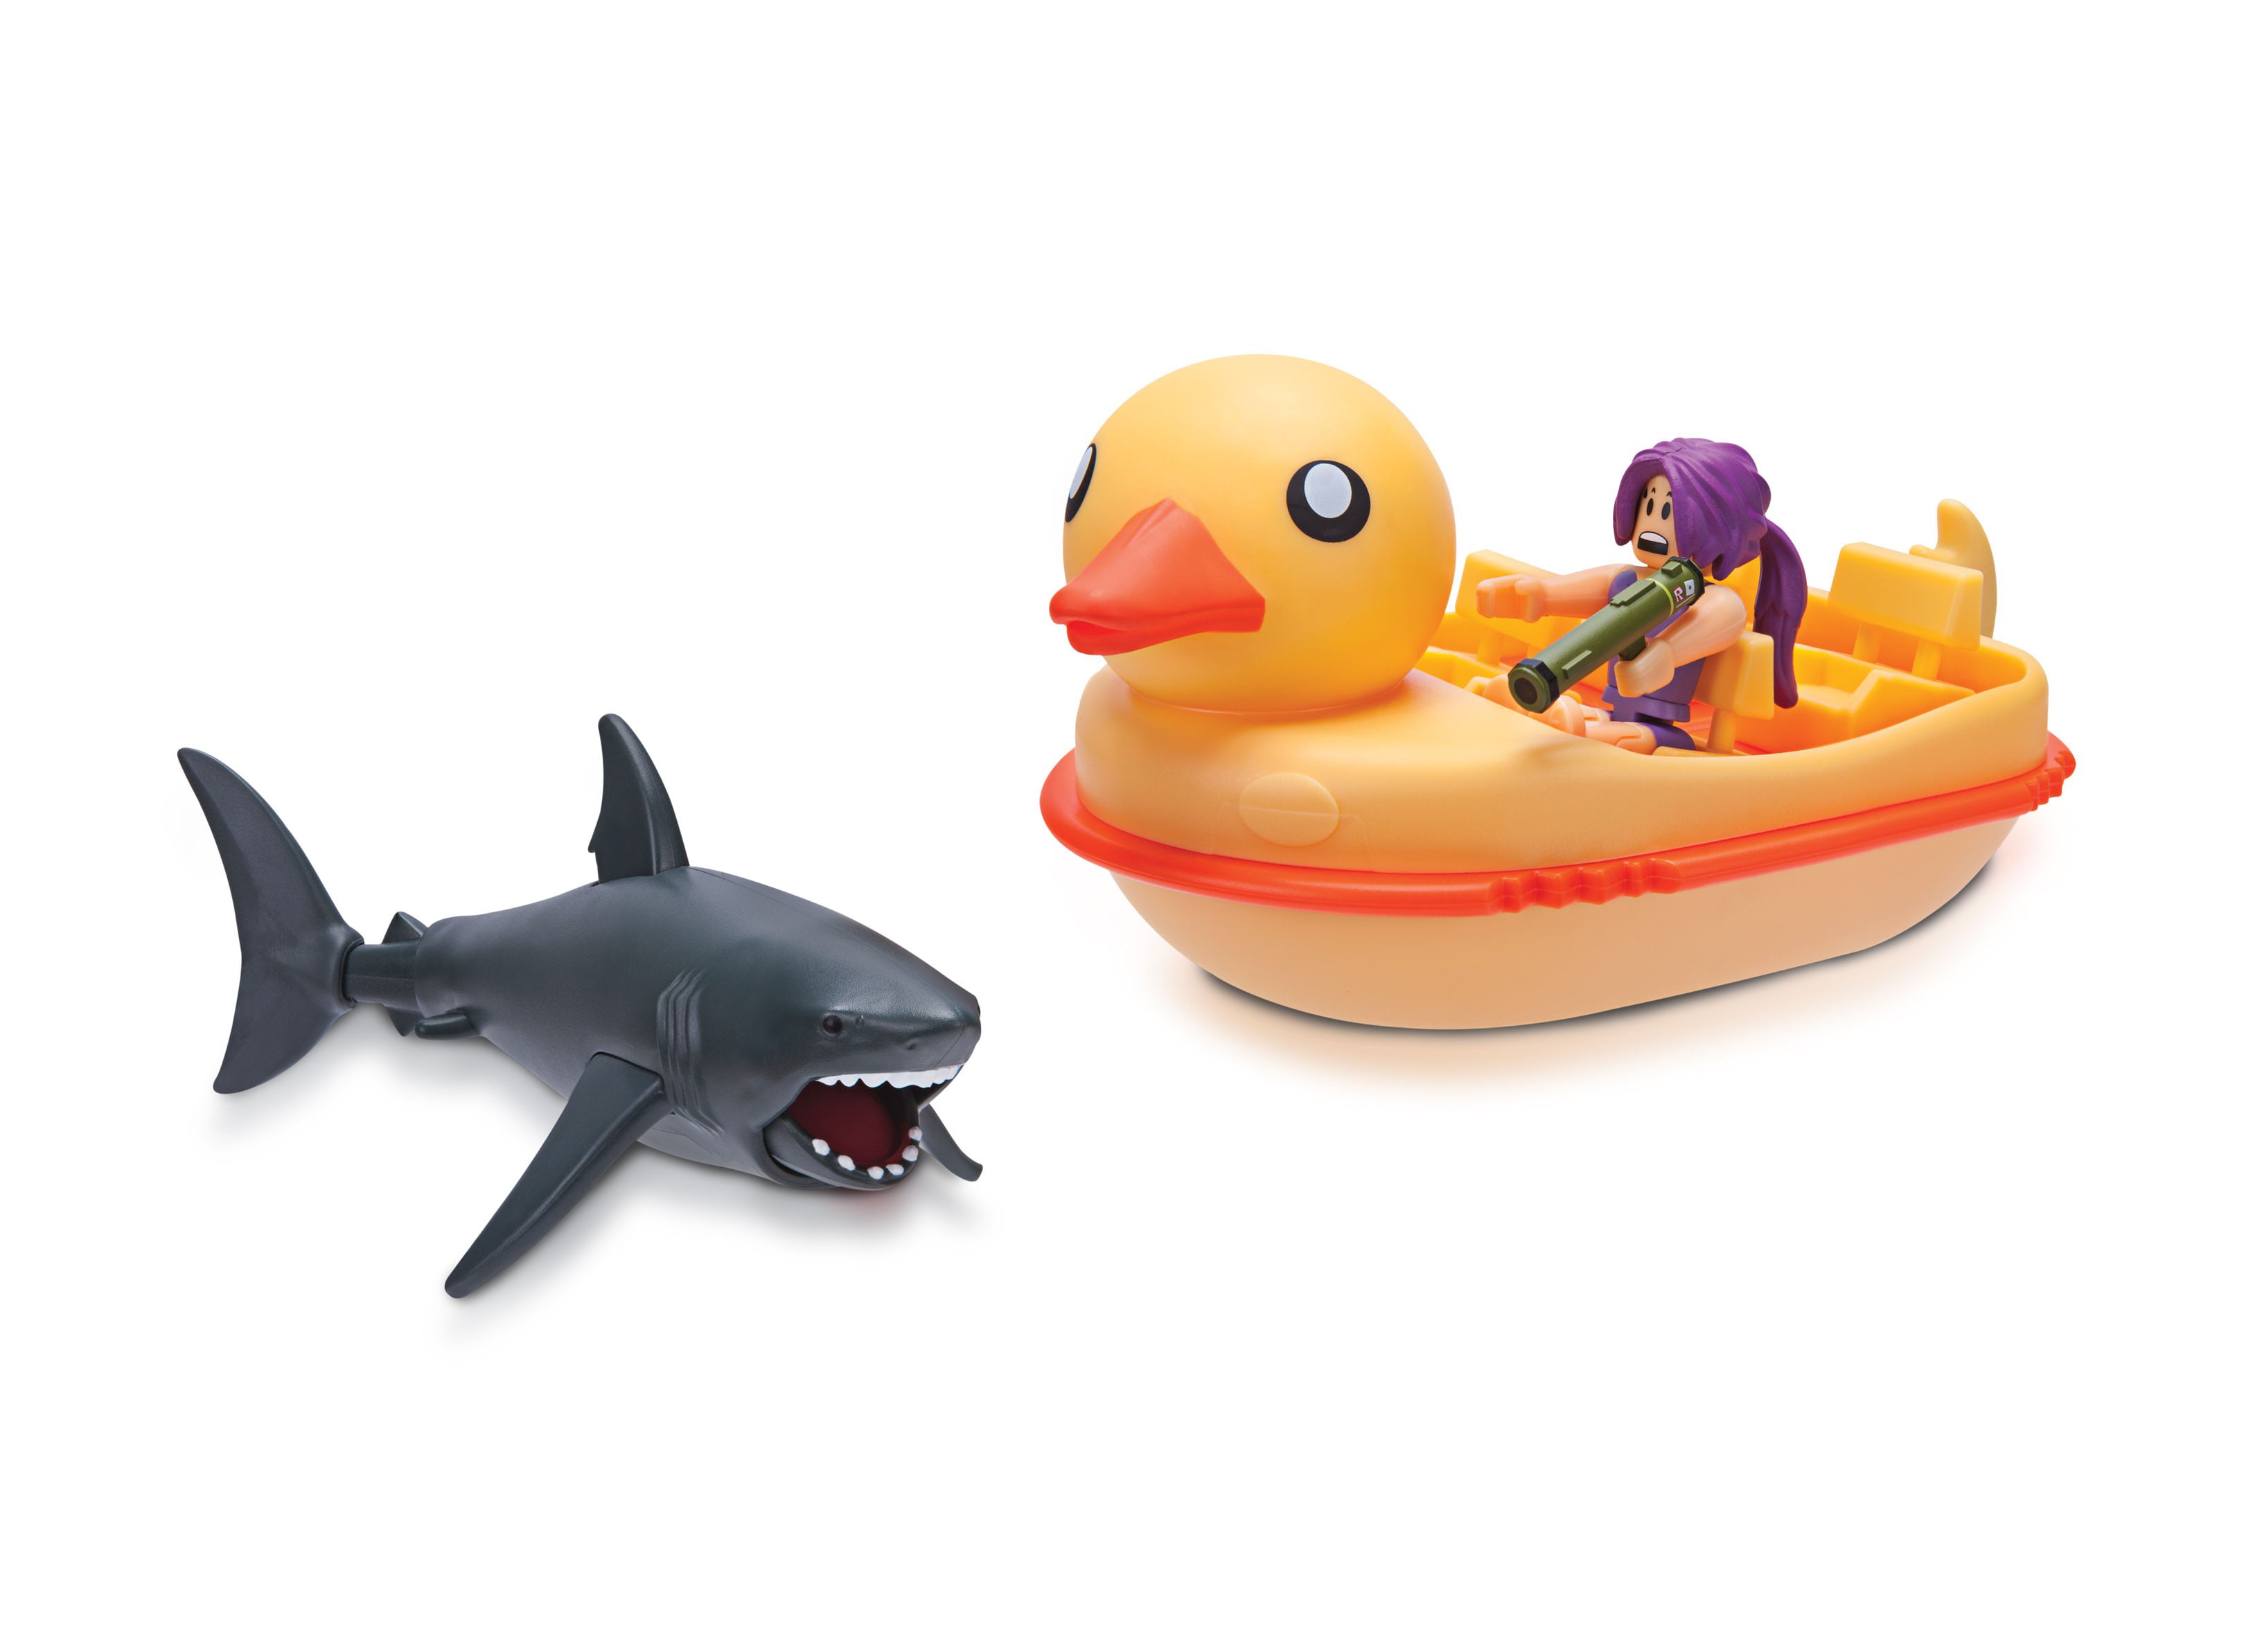 Roblox Celebrity Collection Sharkbite Duck Boat Vehicle Includes Exclusive Virtual Item Walmart Com Walmart Com - roblox celebrity sharkbite duck boat vehicle 1525